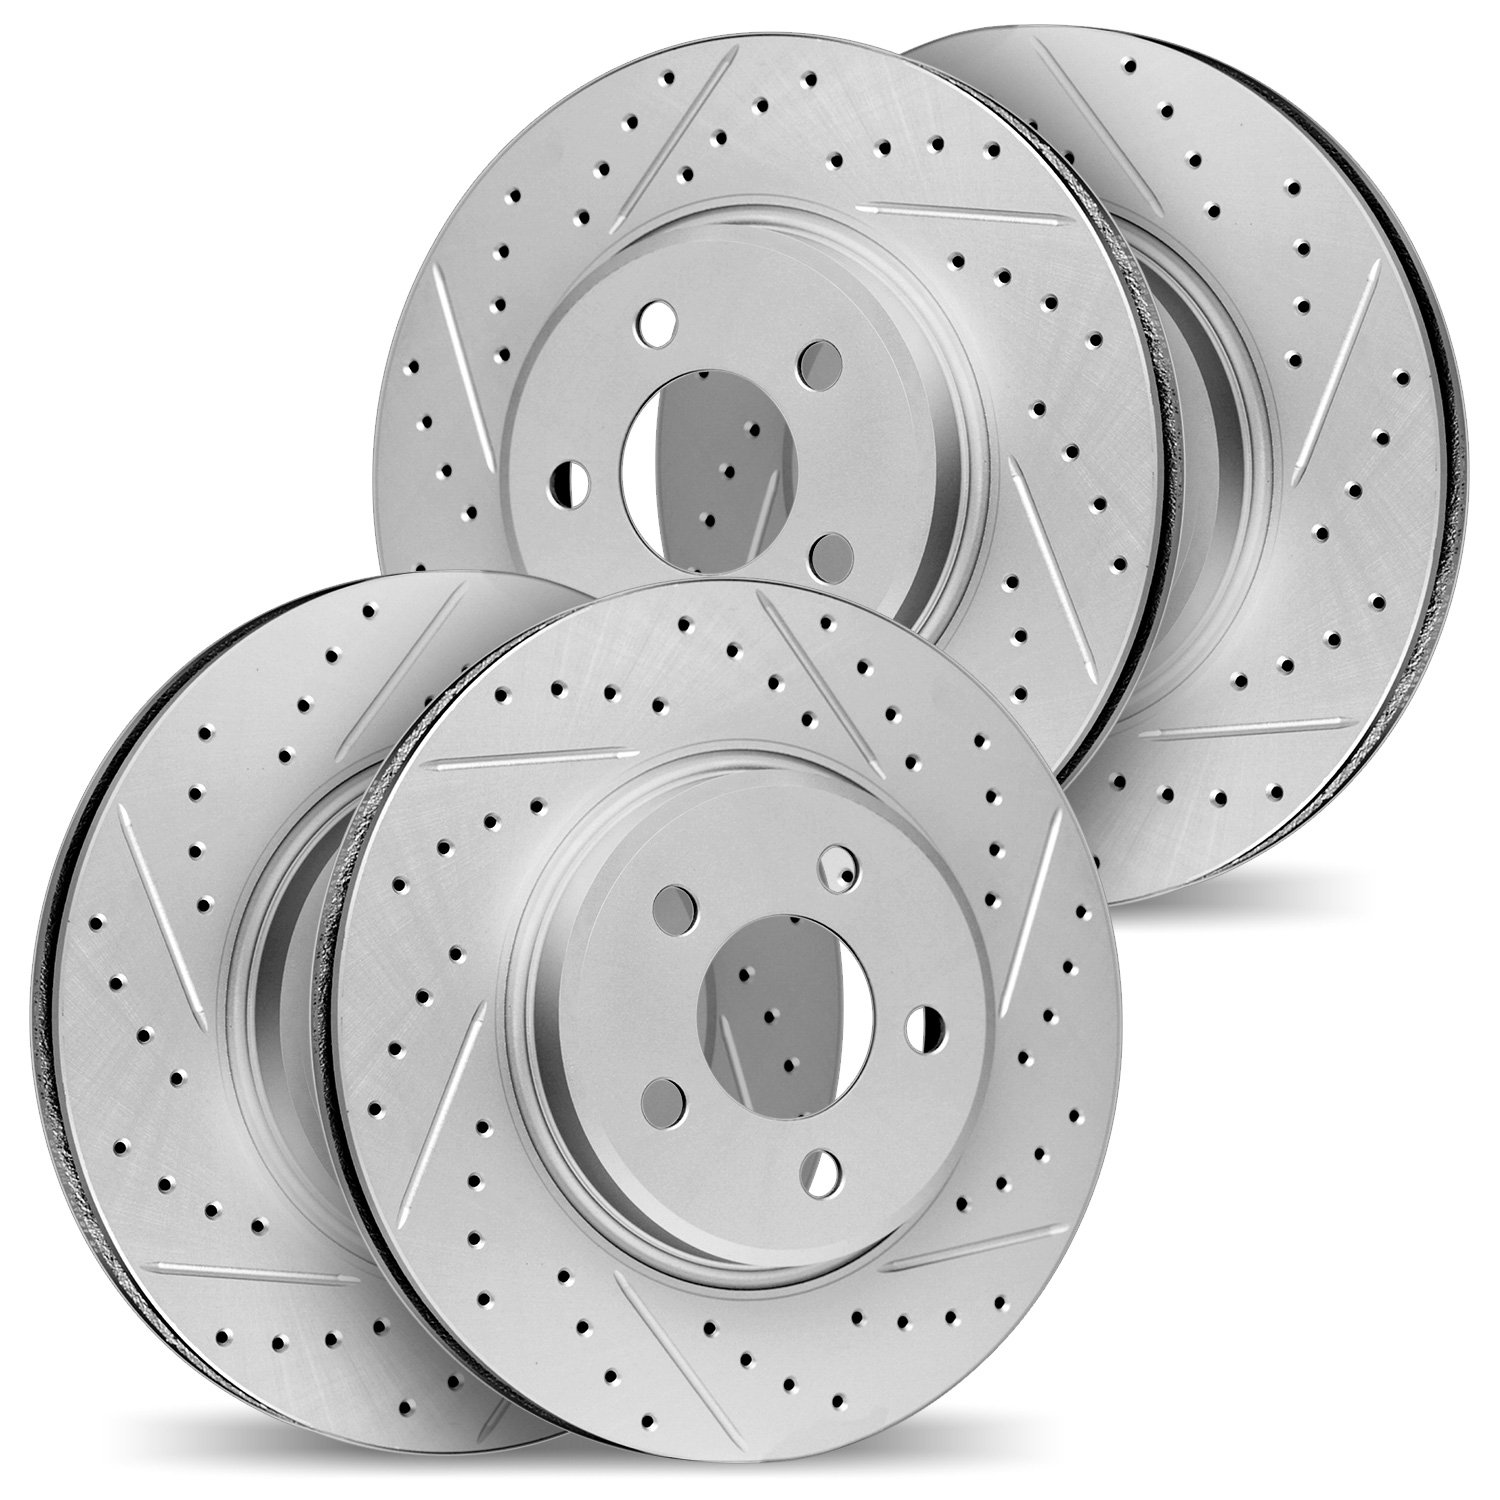 2004-40037 Geoperformance Drilled/Slotted Brake Rotors, 2004-2006 Mopar, Position: Front and Rear